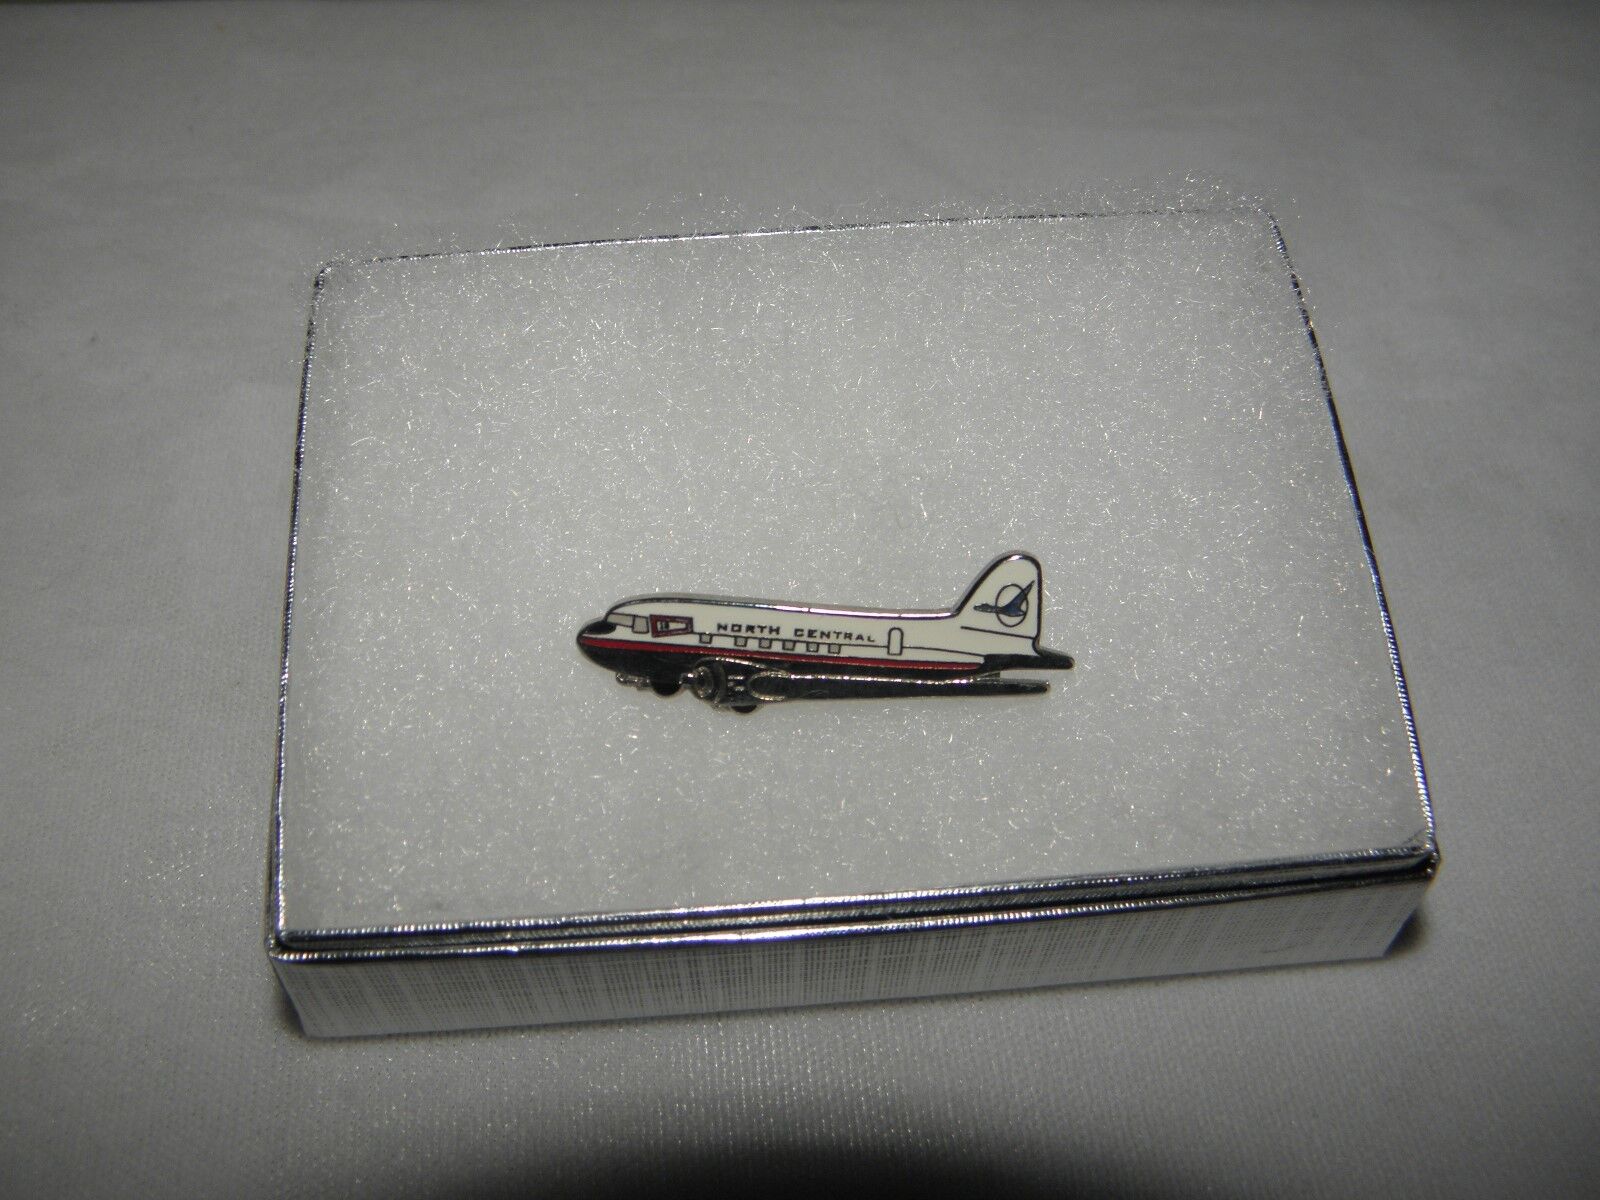 NORTH CENTRAL AIRLINES DC-3 AIRPLANE LAPEL TACK PIN NORTHWEST DELTA PILOT GIFT  